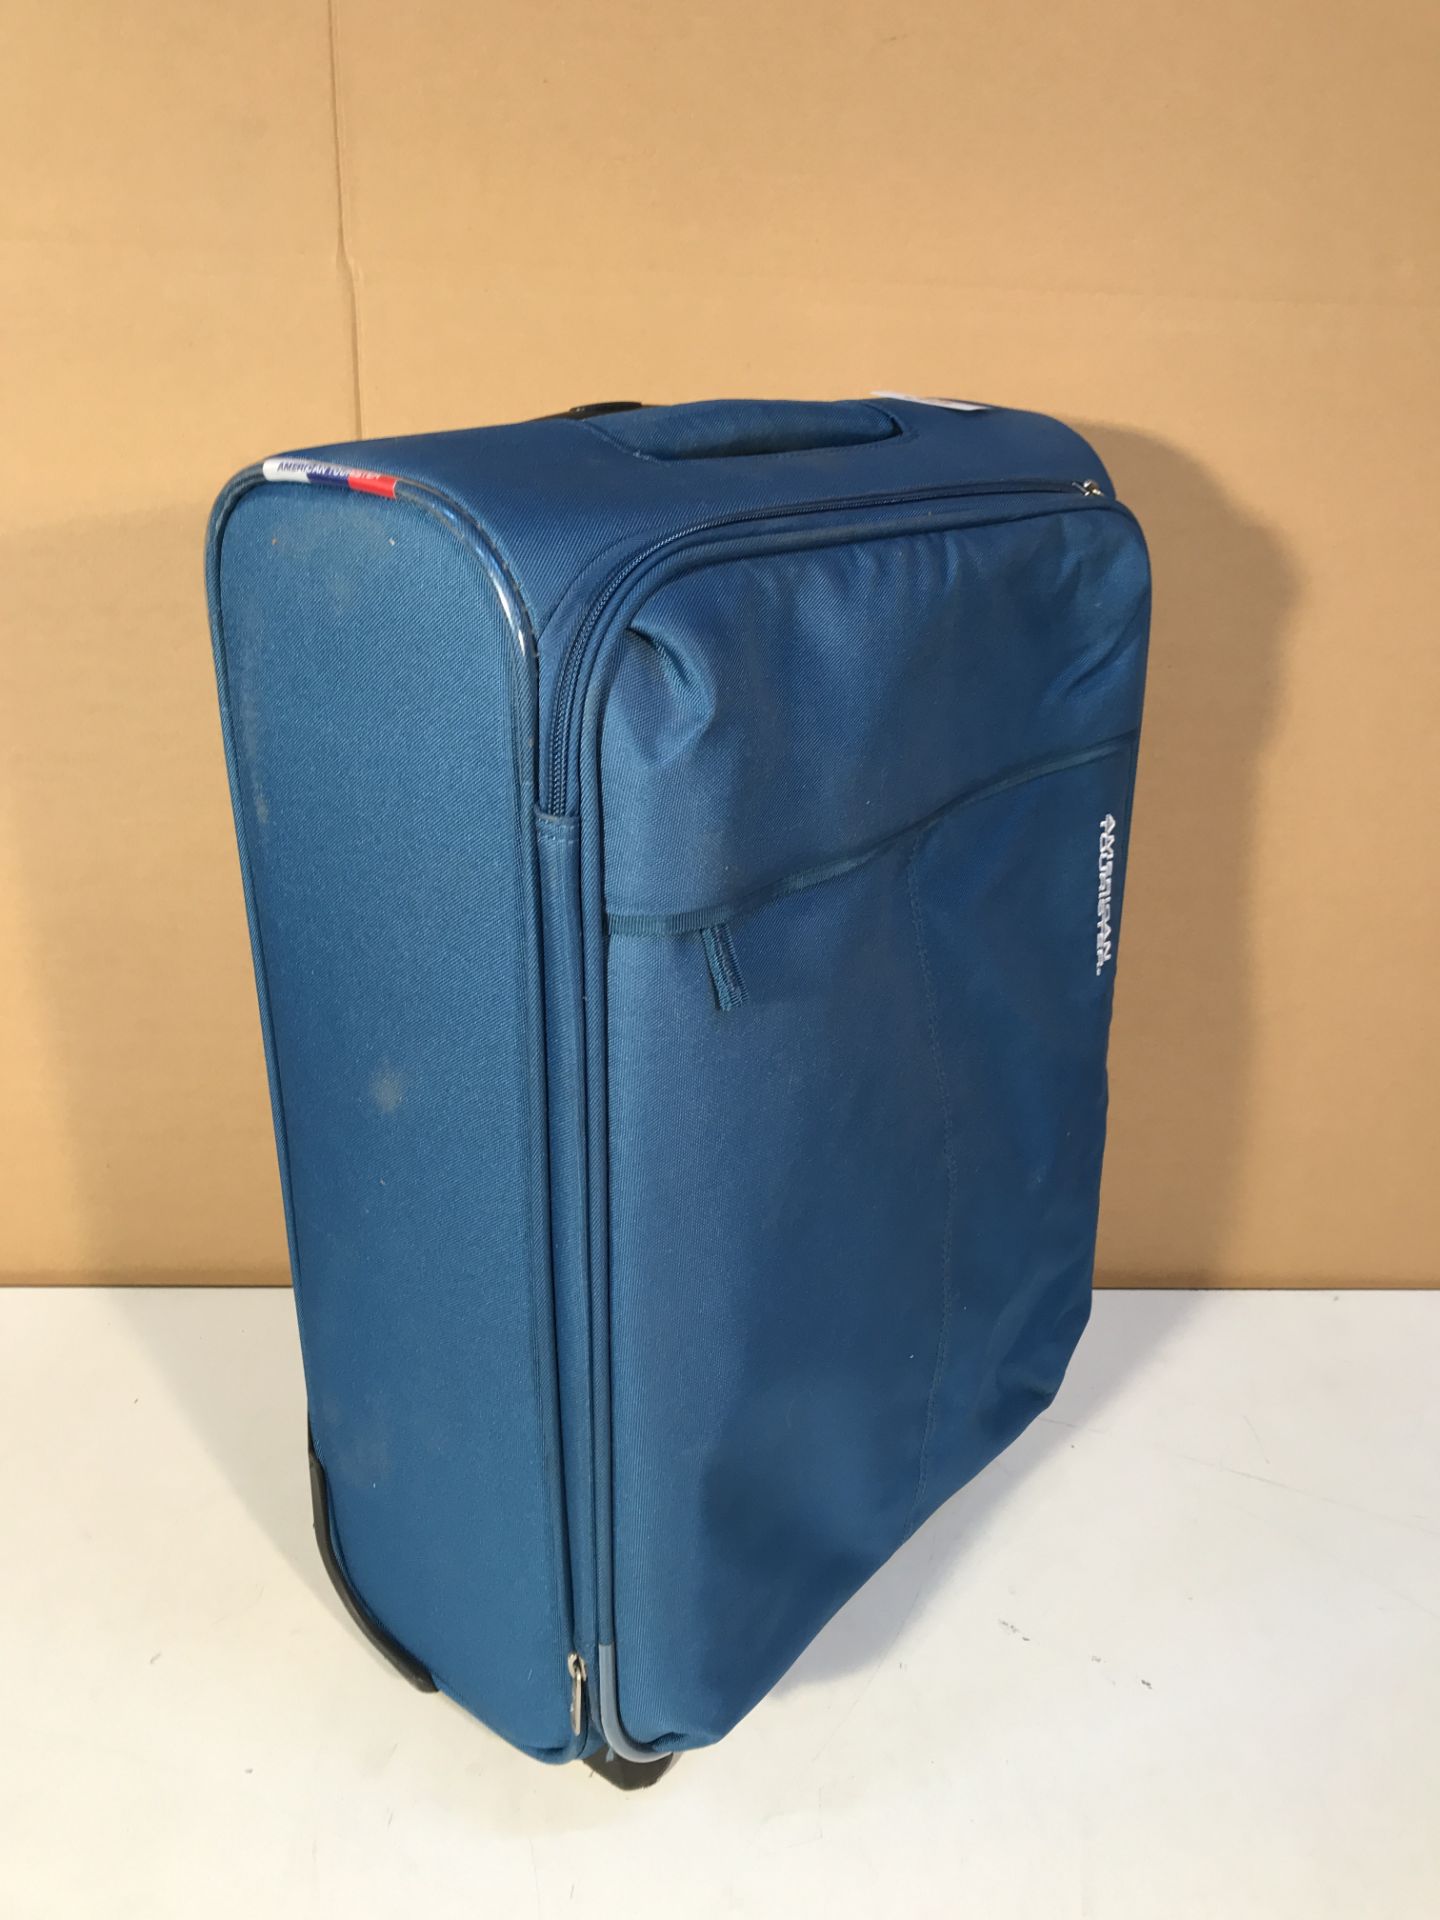 American Tourister Suit Case - Image 2 of 4